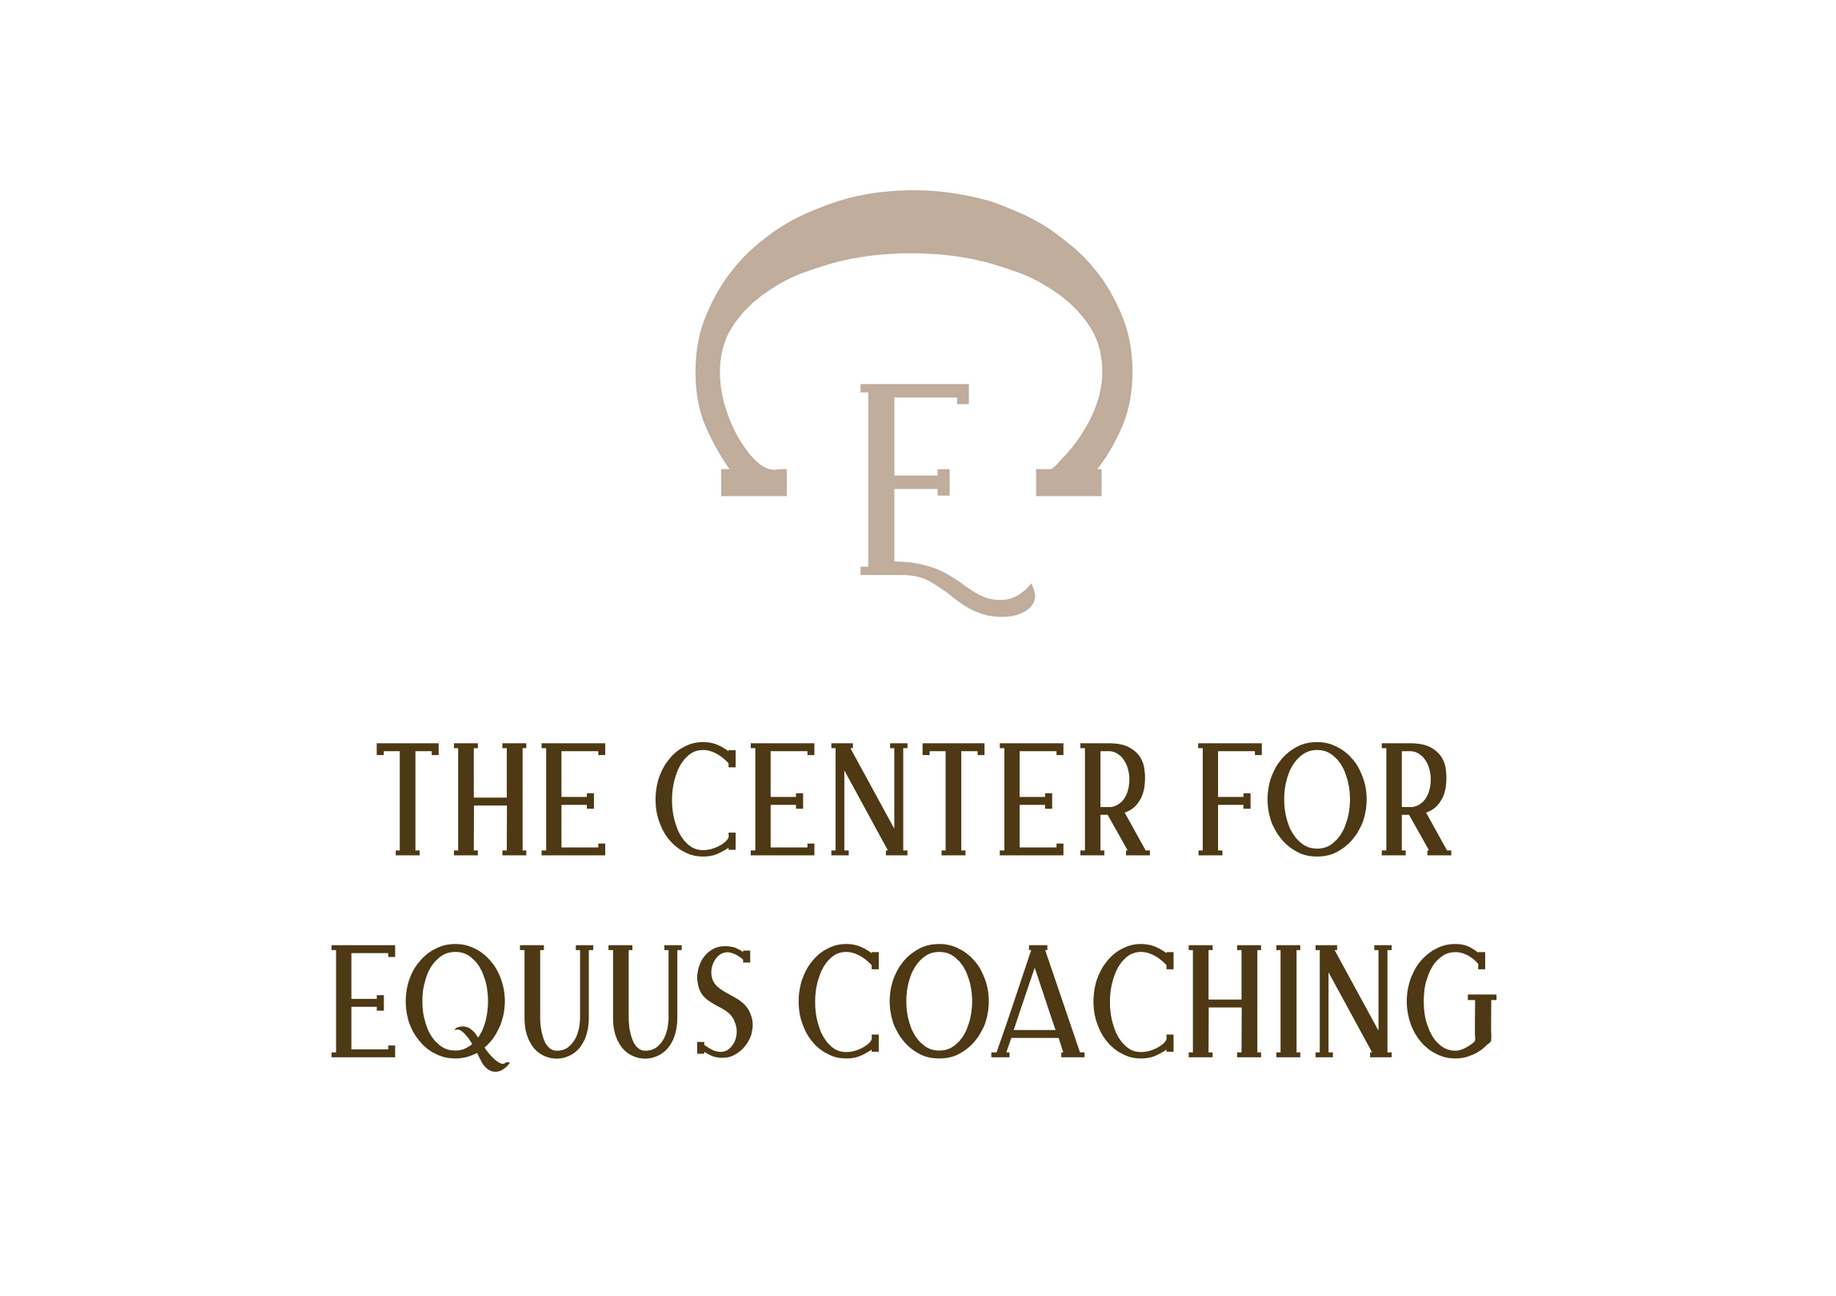 The Center for Equus Coaching